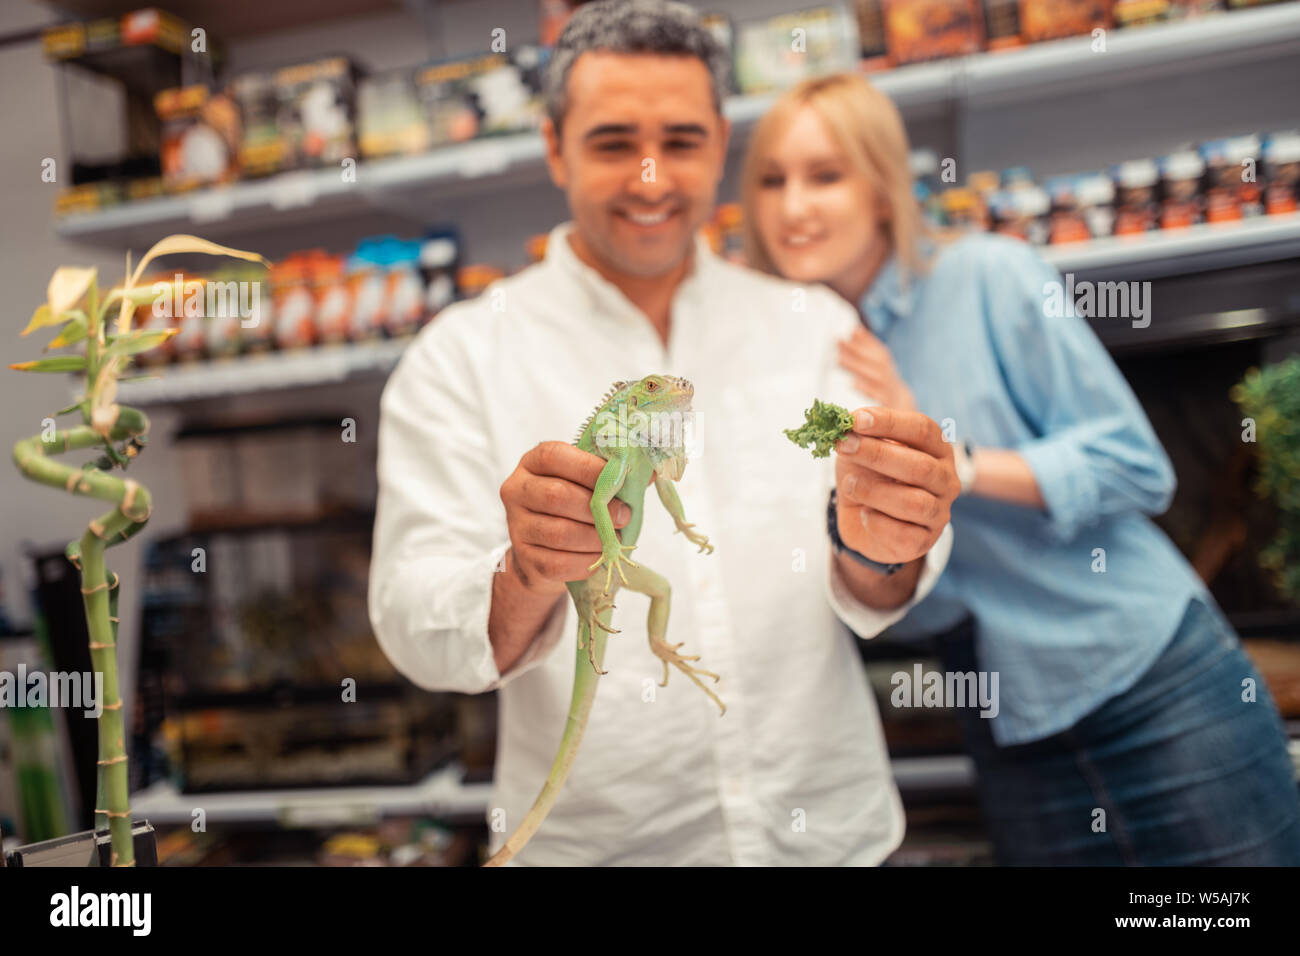 Close up of little green iguana eating lettuce in hands of man Stock Photo